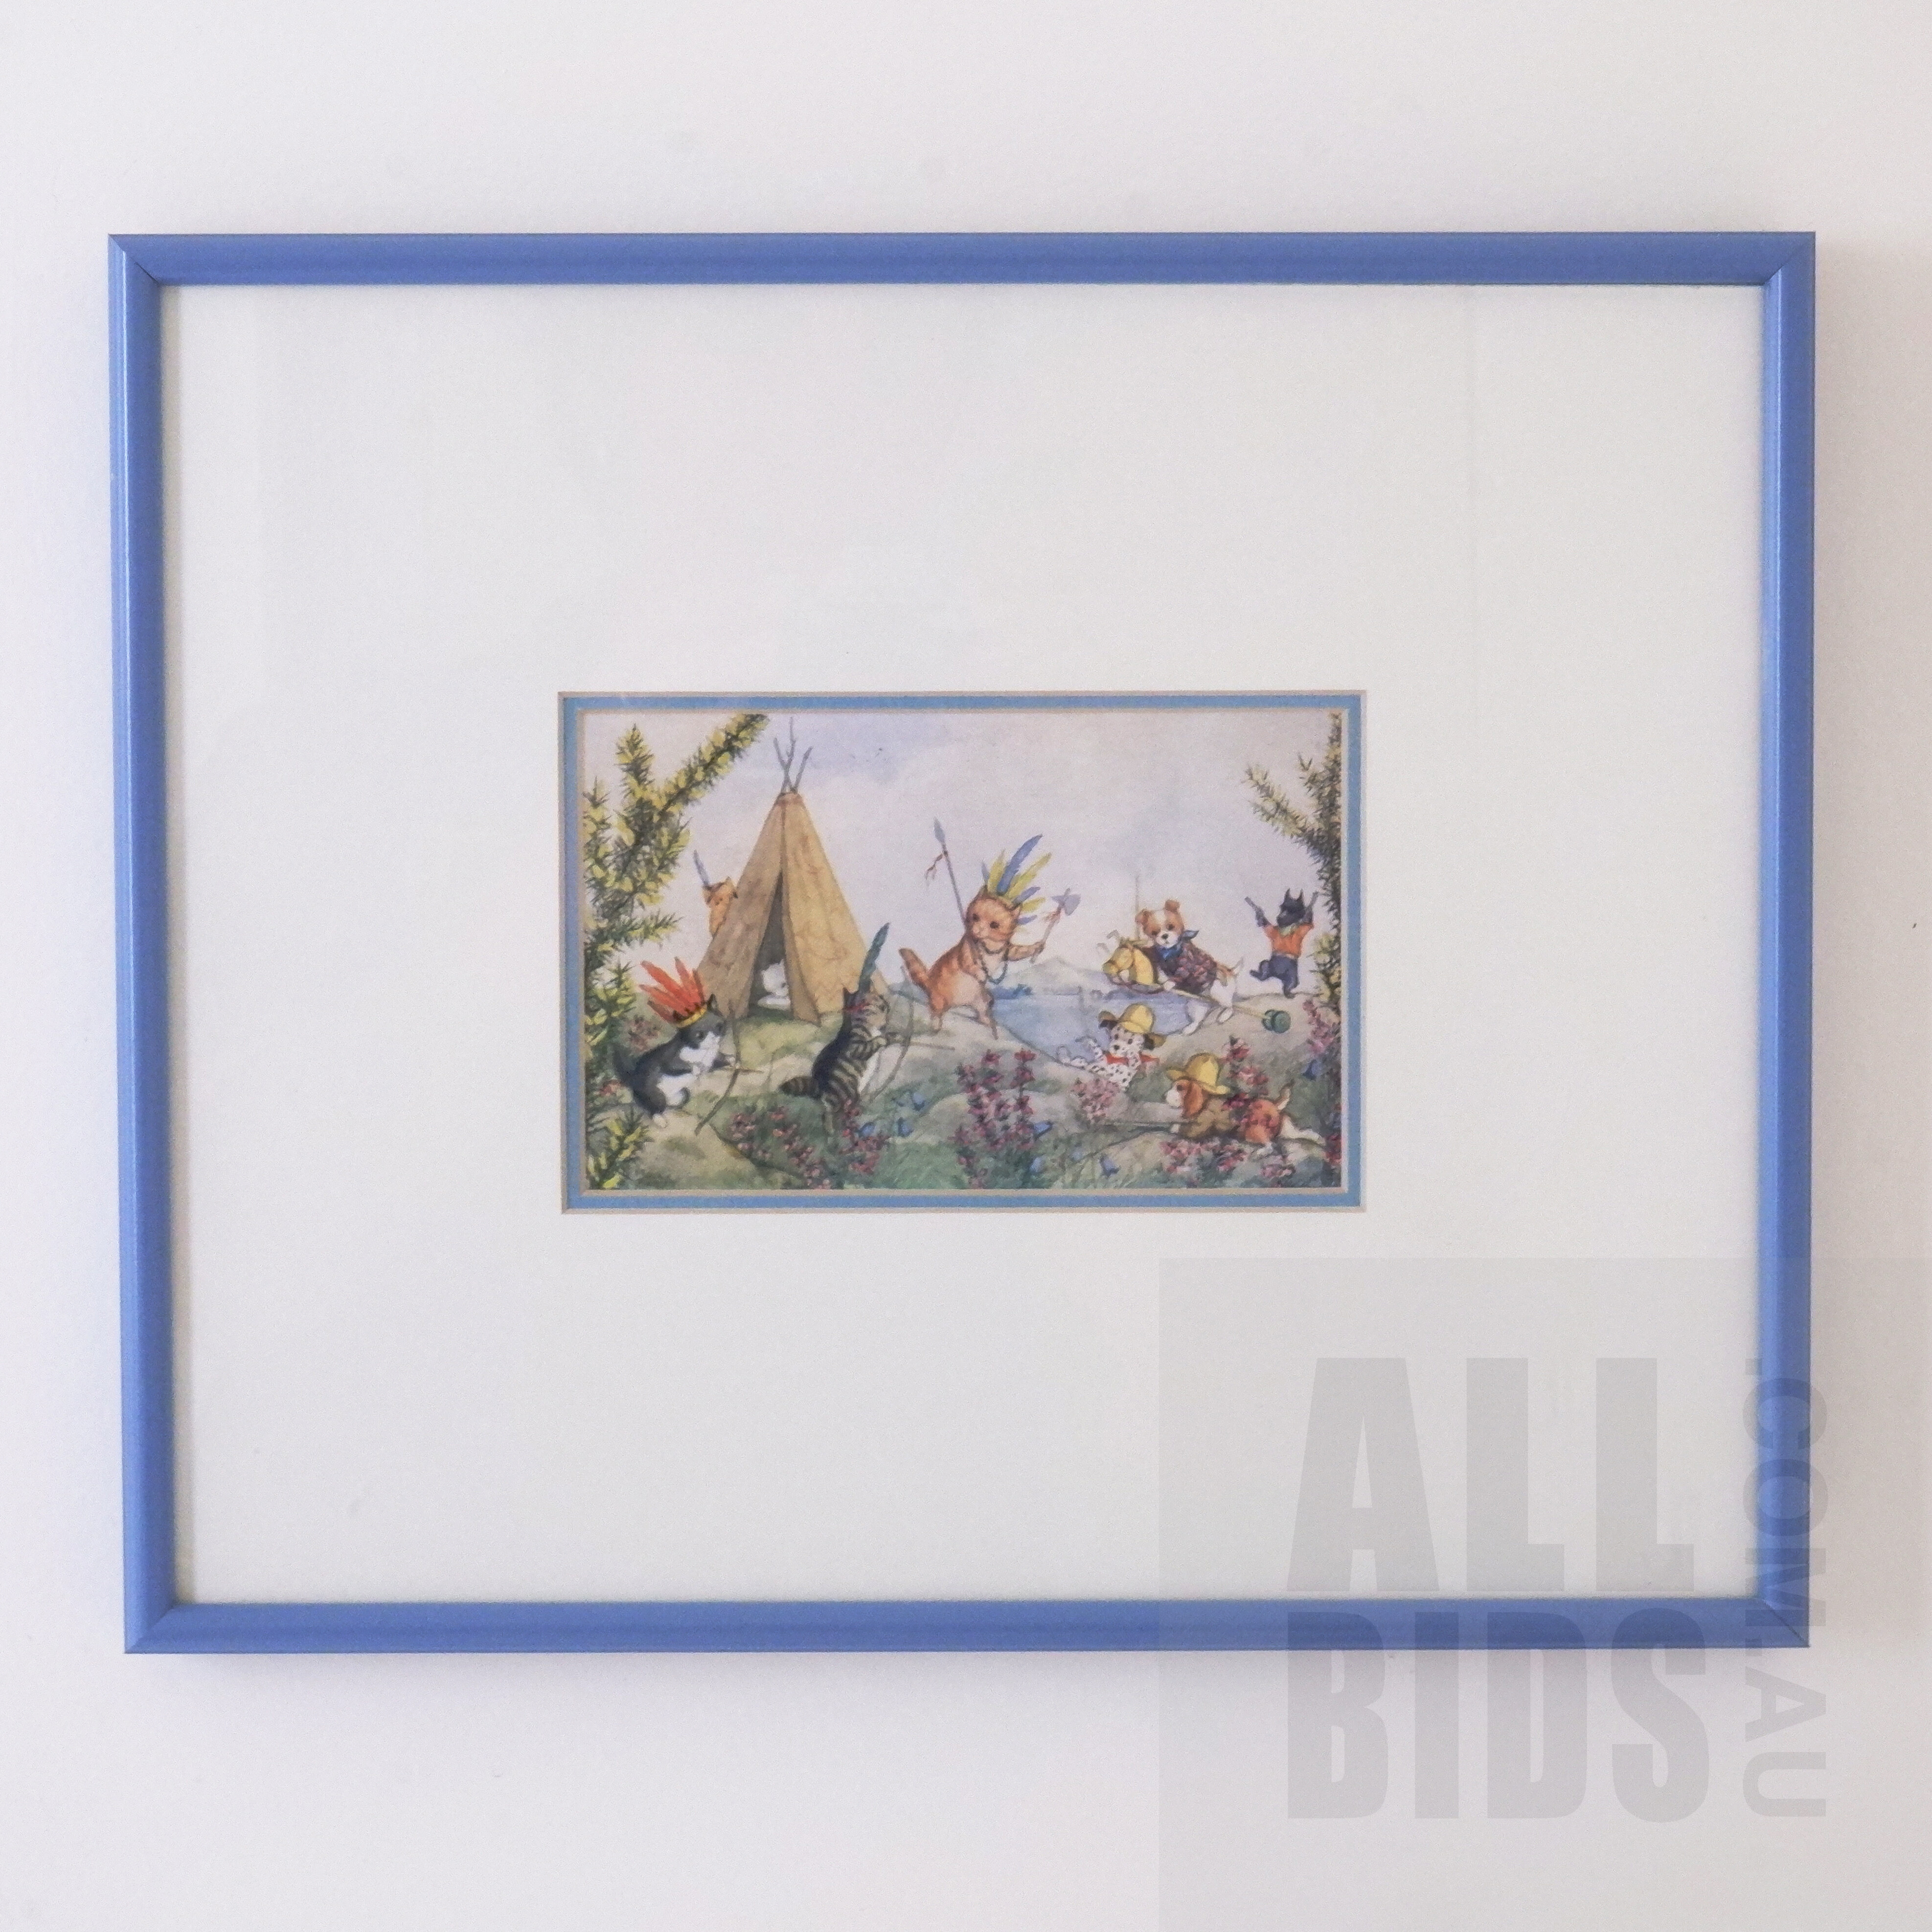 'Framed Offset Print, Puppies and Kittens, 25 x 30 cm (overall)'